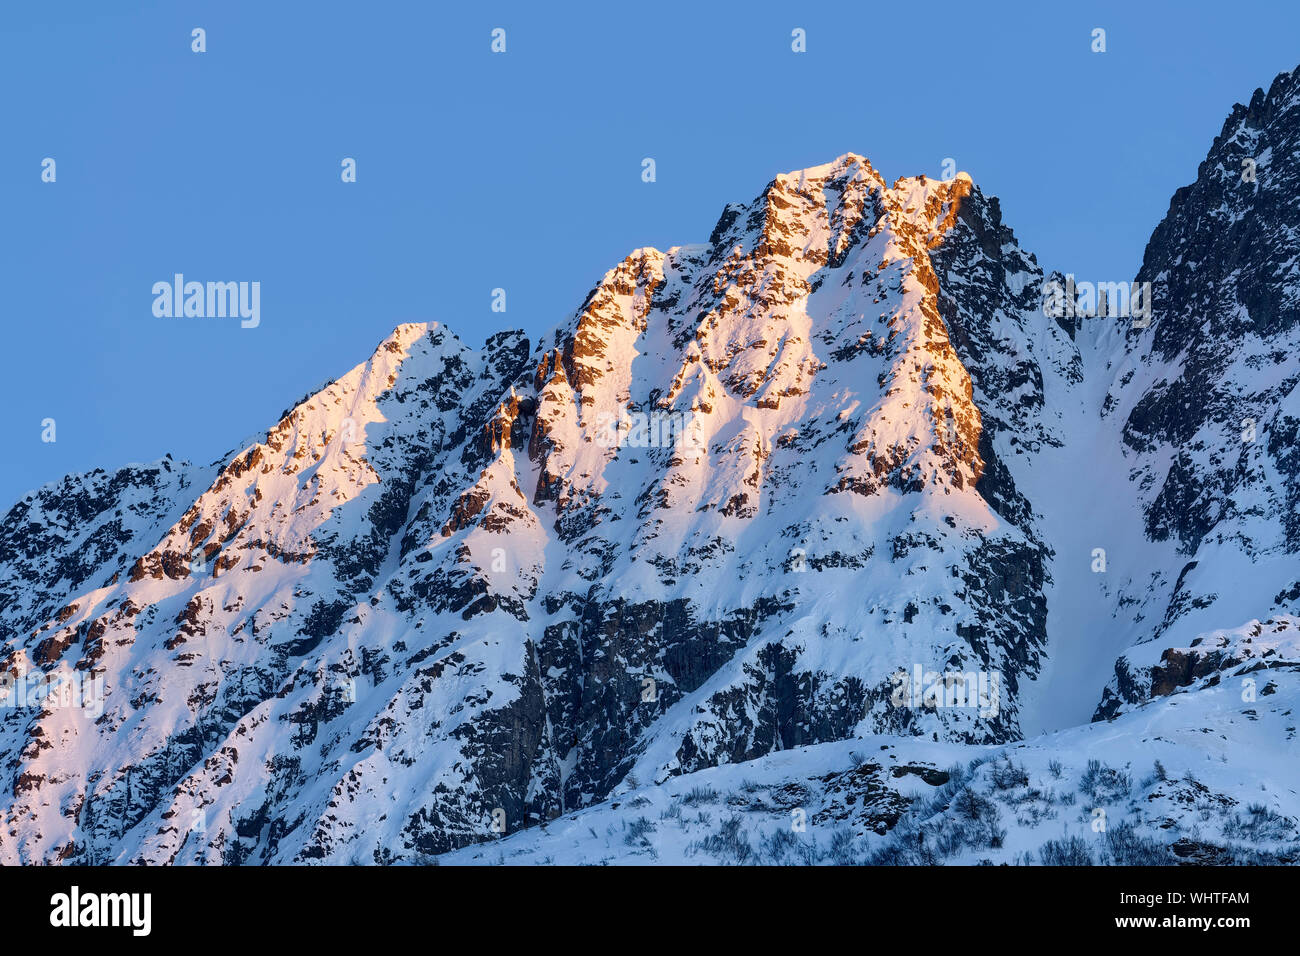 The beautiful snow covered mountains around Passo Tonale in winter, Italy. Stock Photo